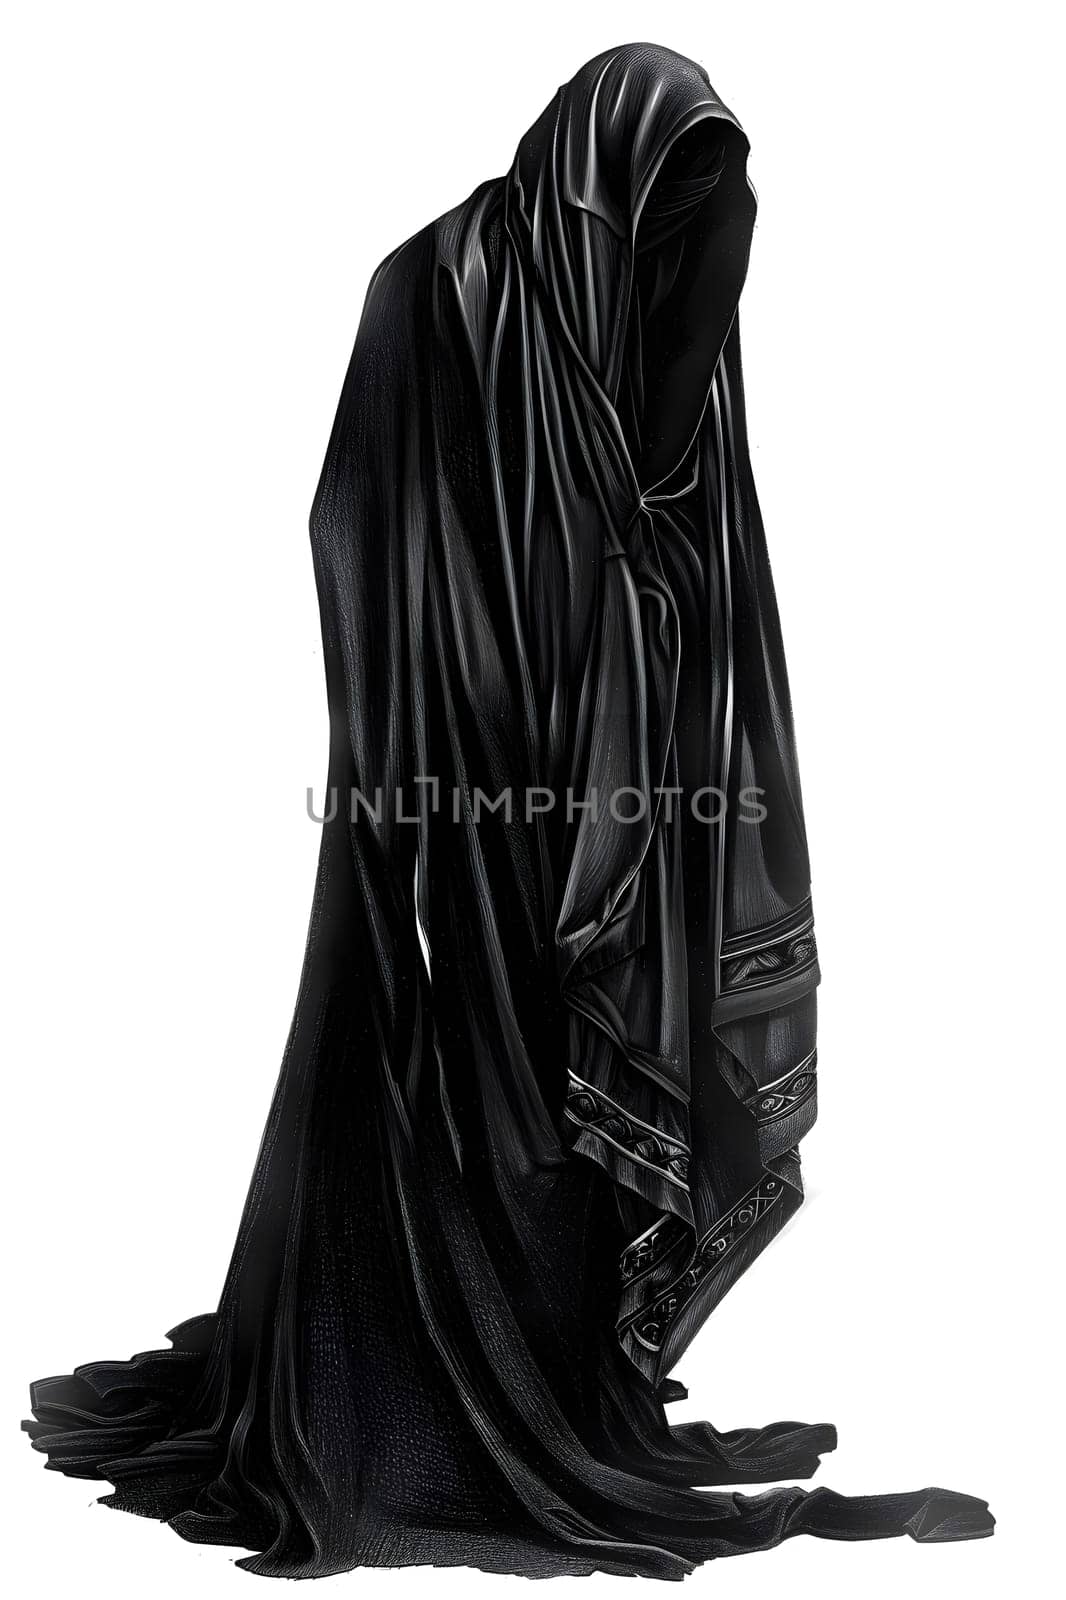 Outerwear of long black cloak with hood worn by the grim reaper by Nadtochiy